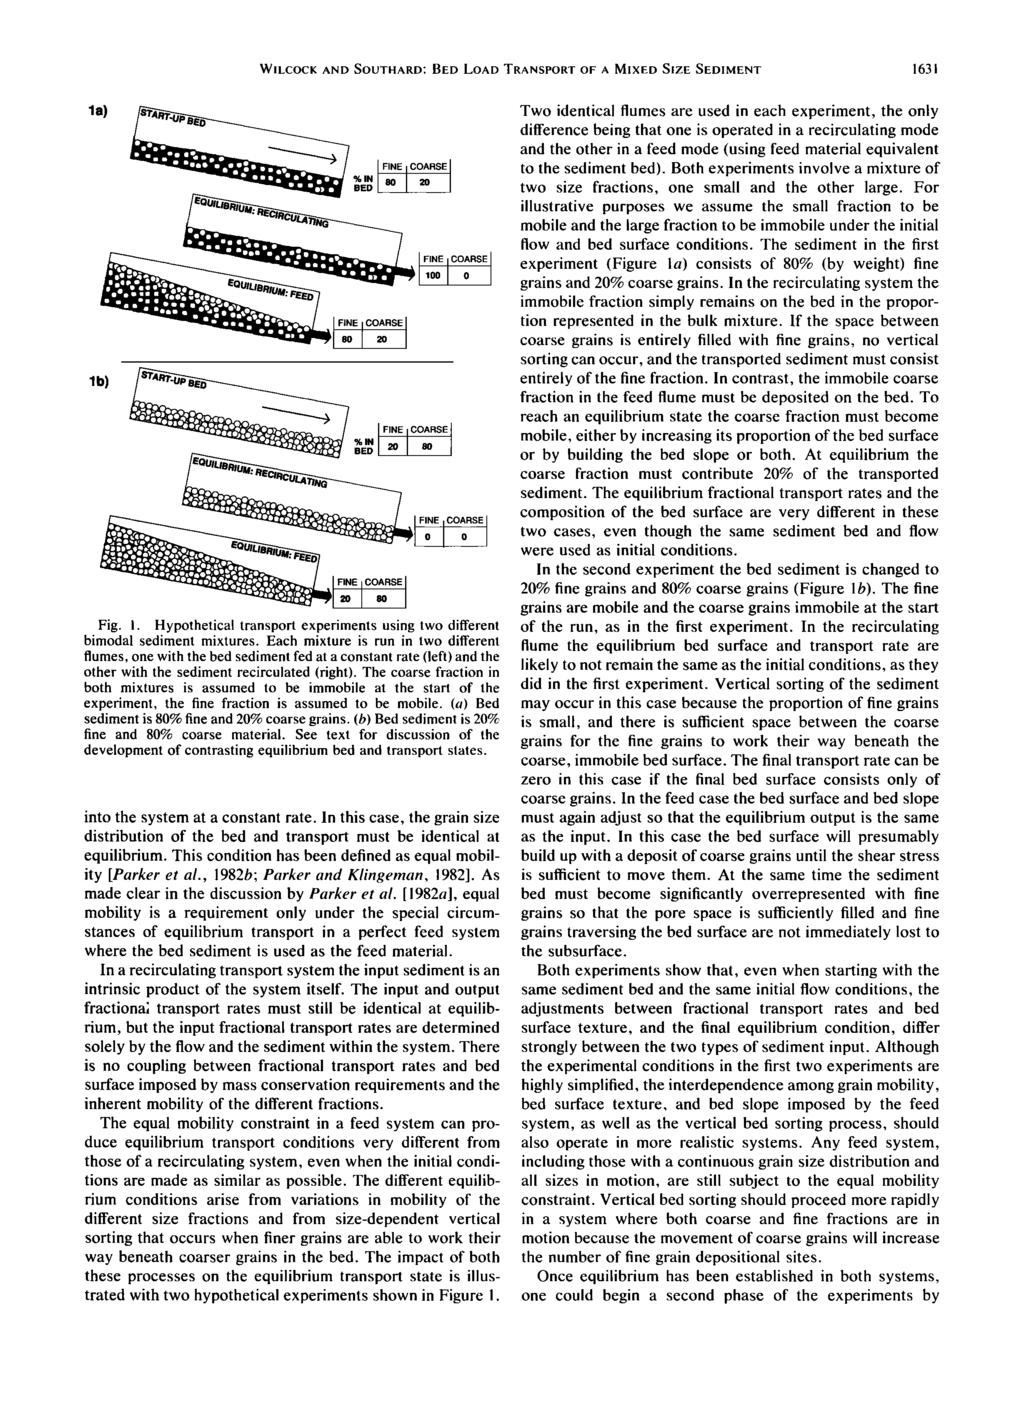 WILCOCK AND SOUTHARD: BED LOAD TRANSPORT OF A MIXED SIZE SEDIMENT 1631 la) lb) FINE COARSE % BED IN 80 20 FINE COARSE 100 0 FINE COARSE % BED IN 20 80 F E CO RSE 1 [ FINE I COARSE I 1 20 80 Fig. 1. Hypthetical transprt experiments using tw different bimdal sediment mixtures.